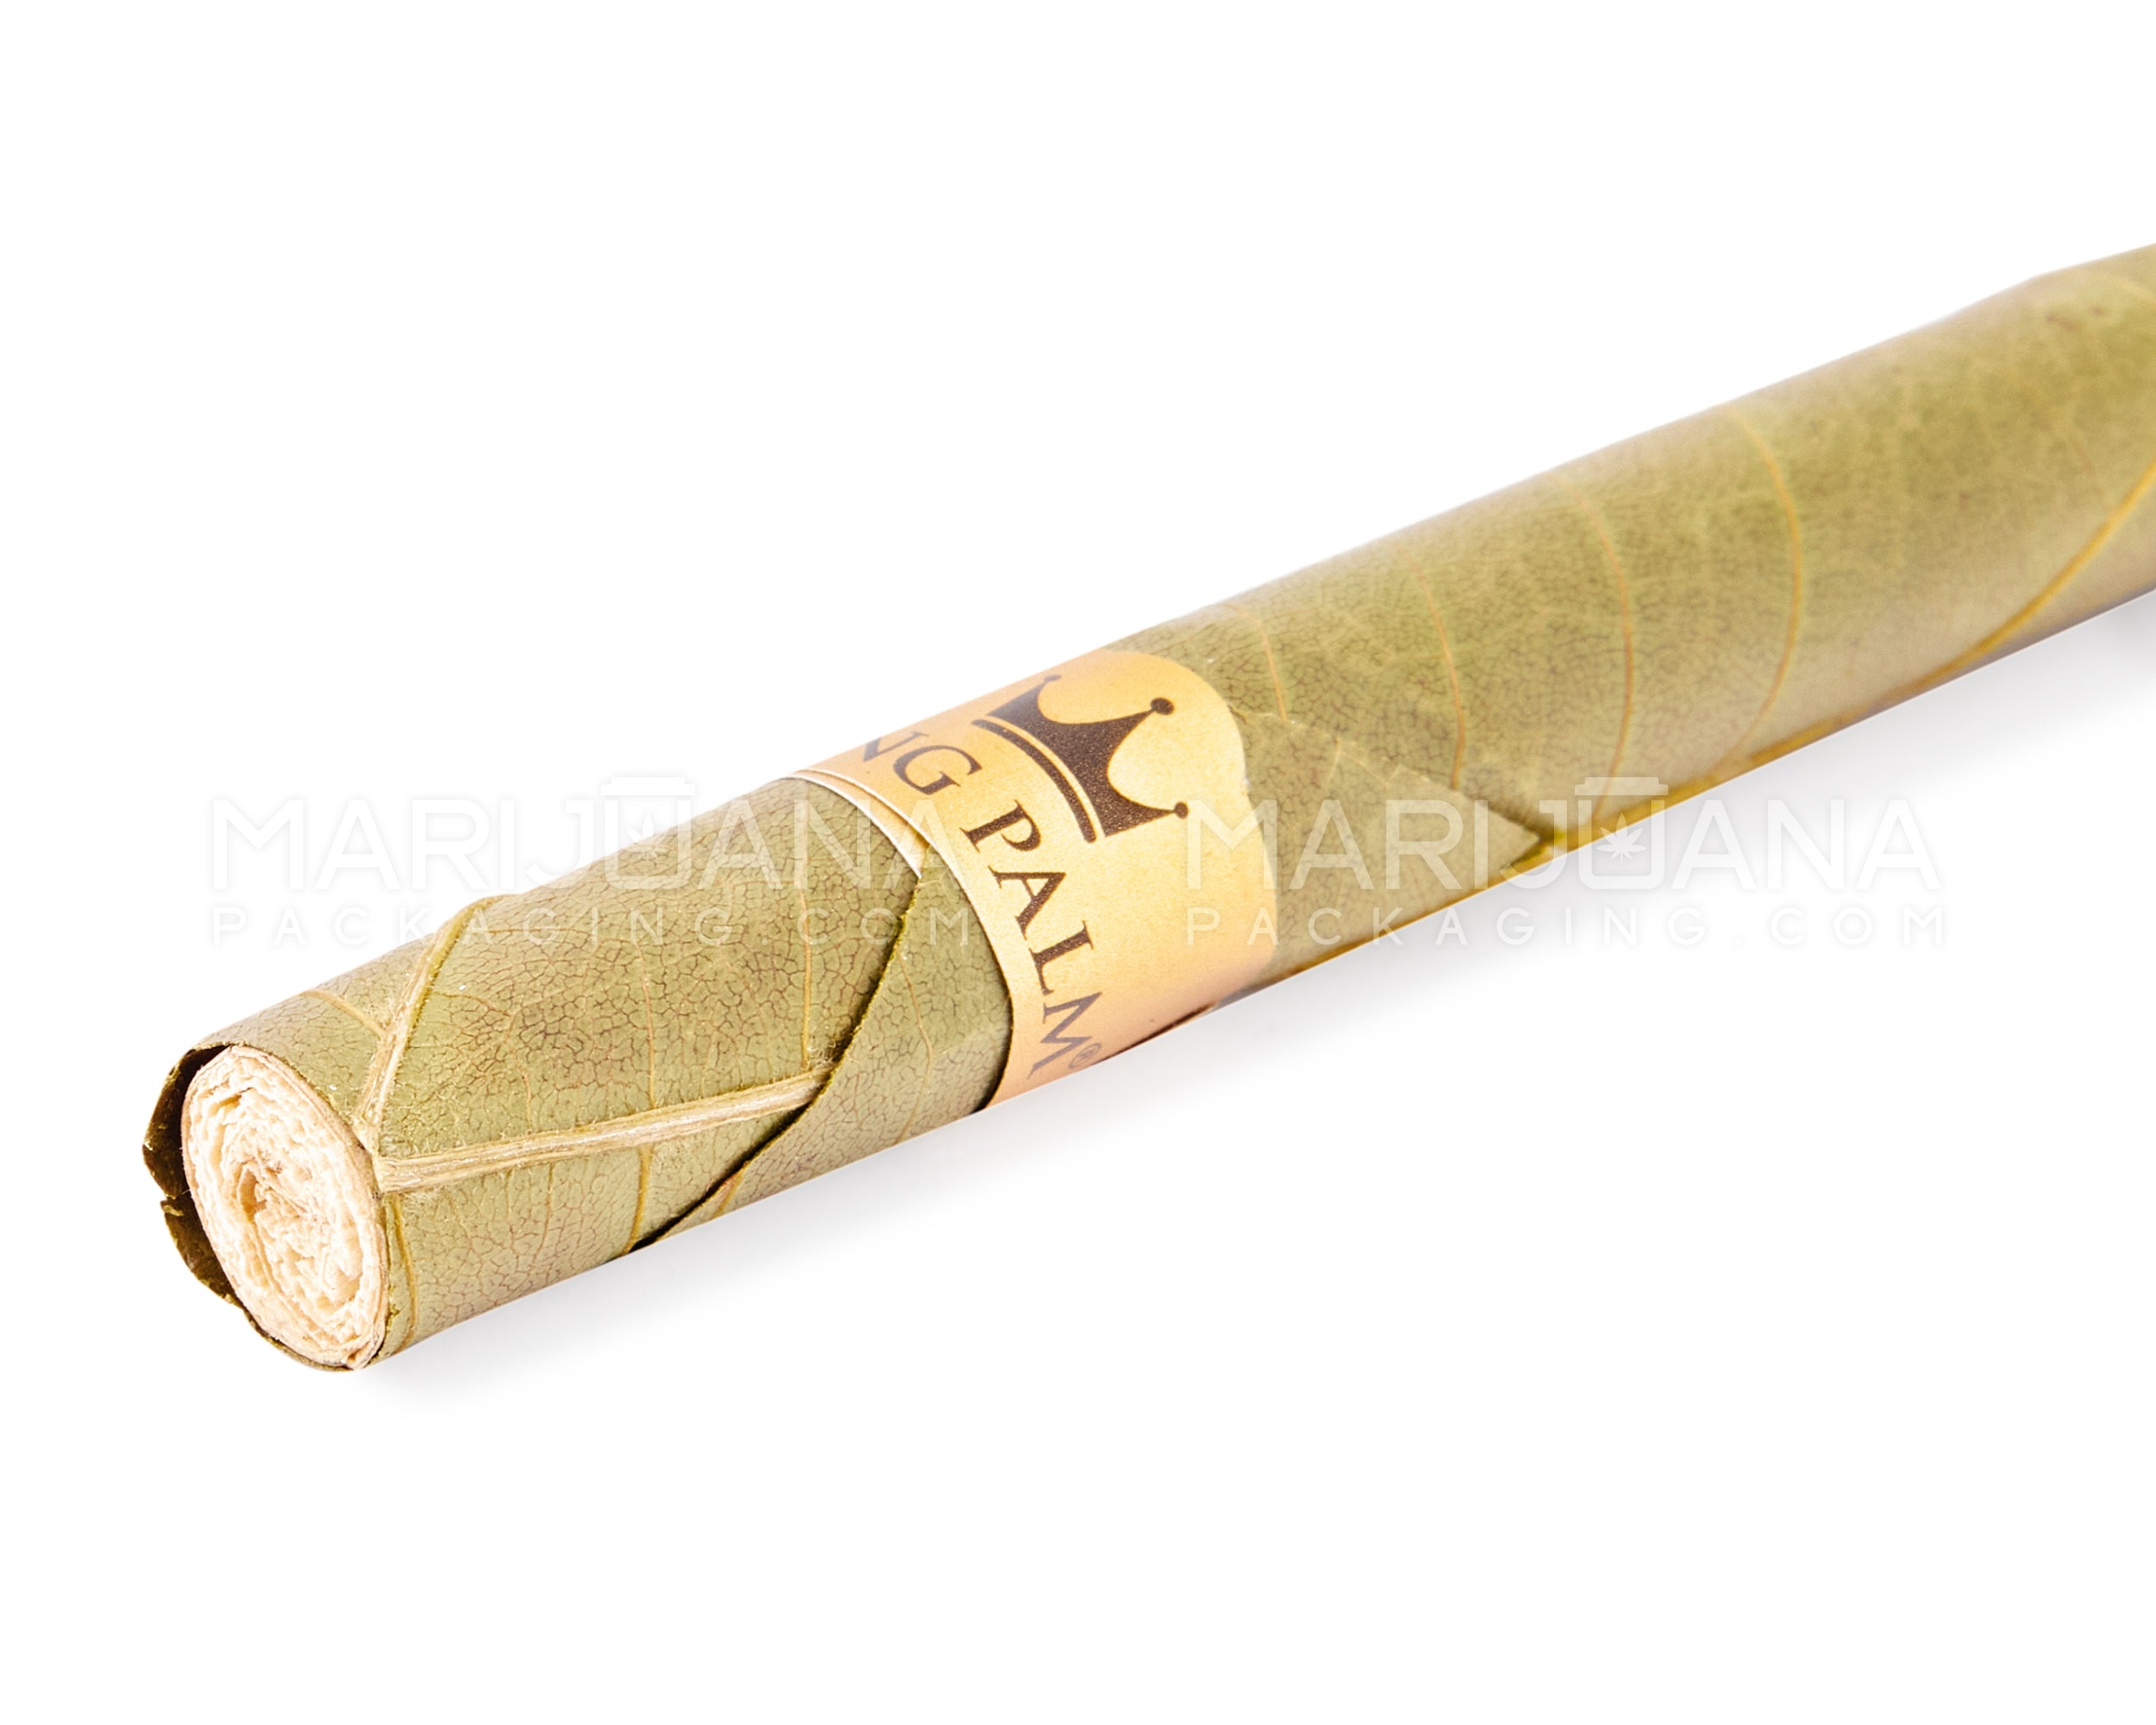 KING PALM | 'Retail Display' Mini Green Natural Leaf Blunt Wraps | 84mm - Berry Terps - 15 Count - 6